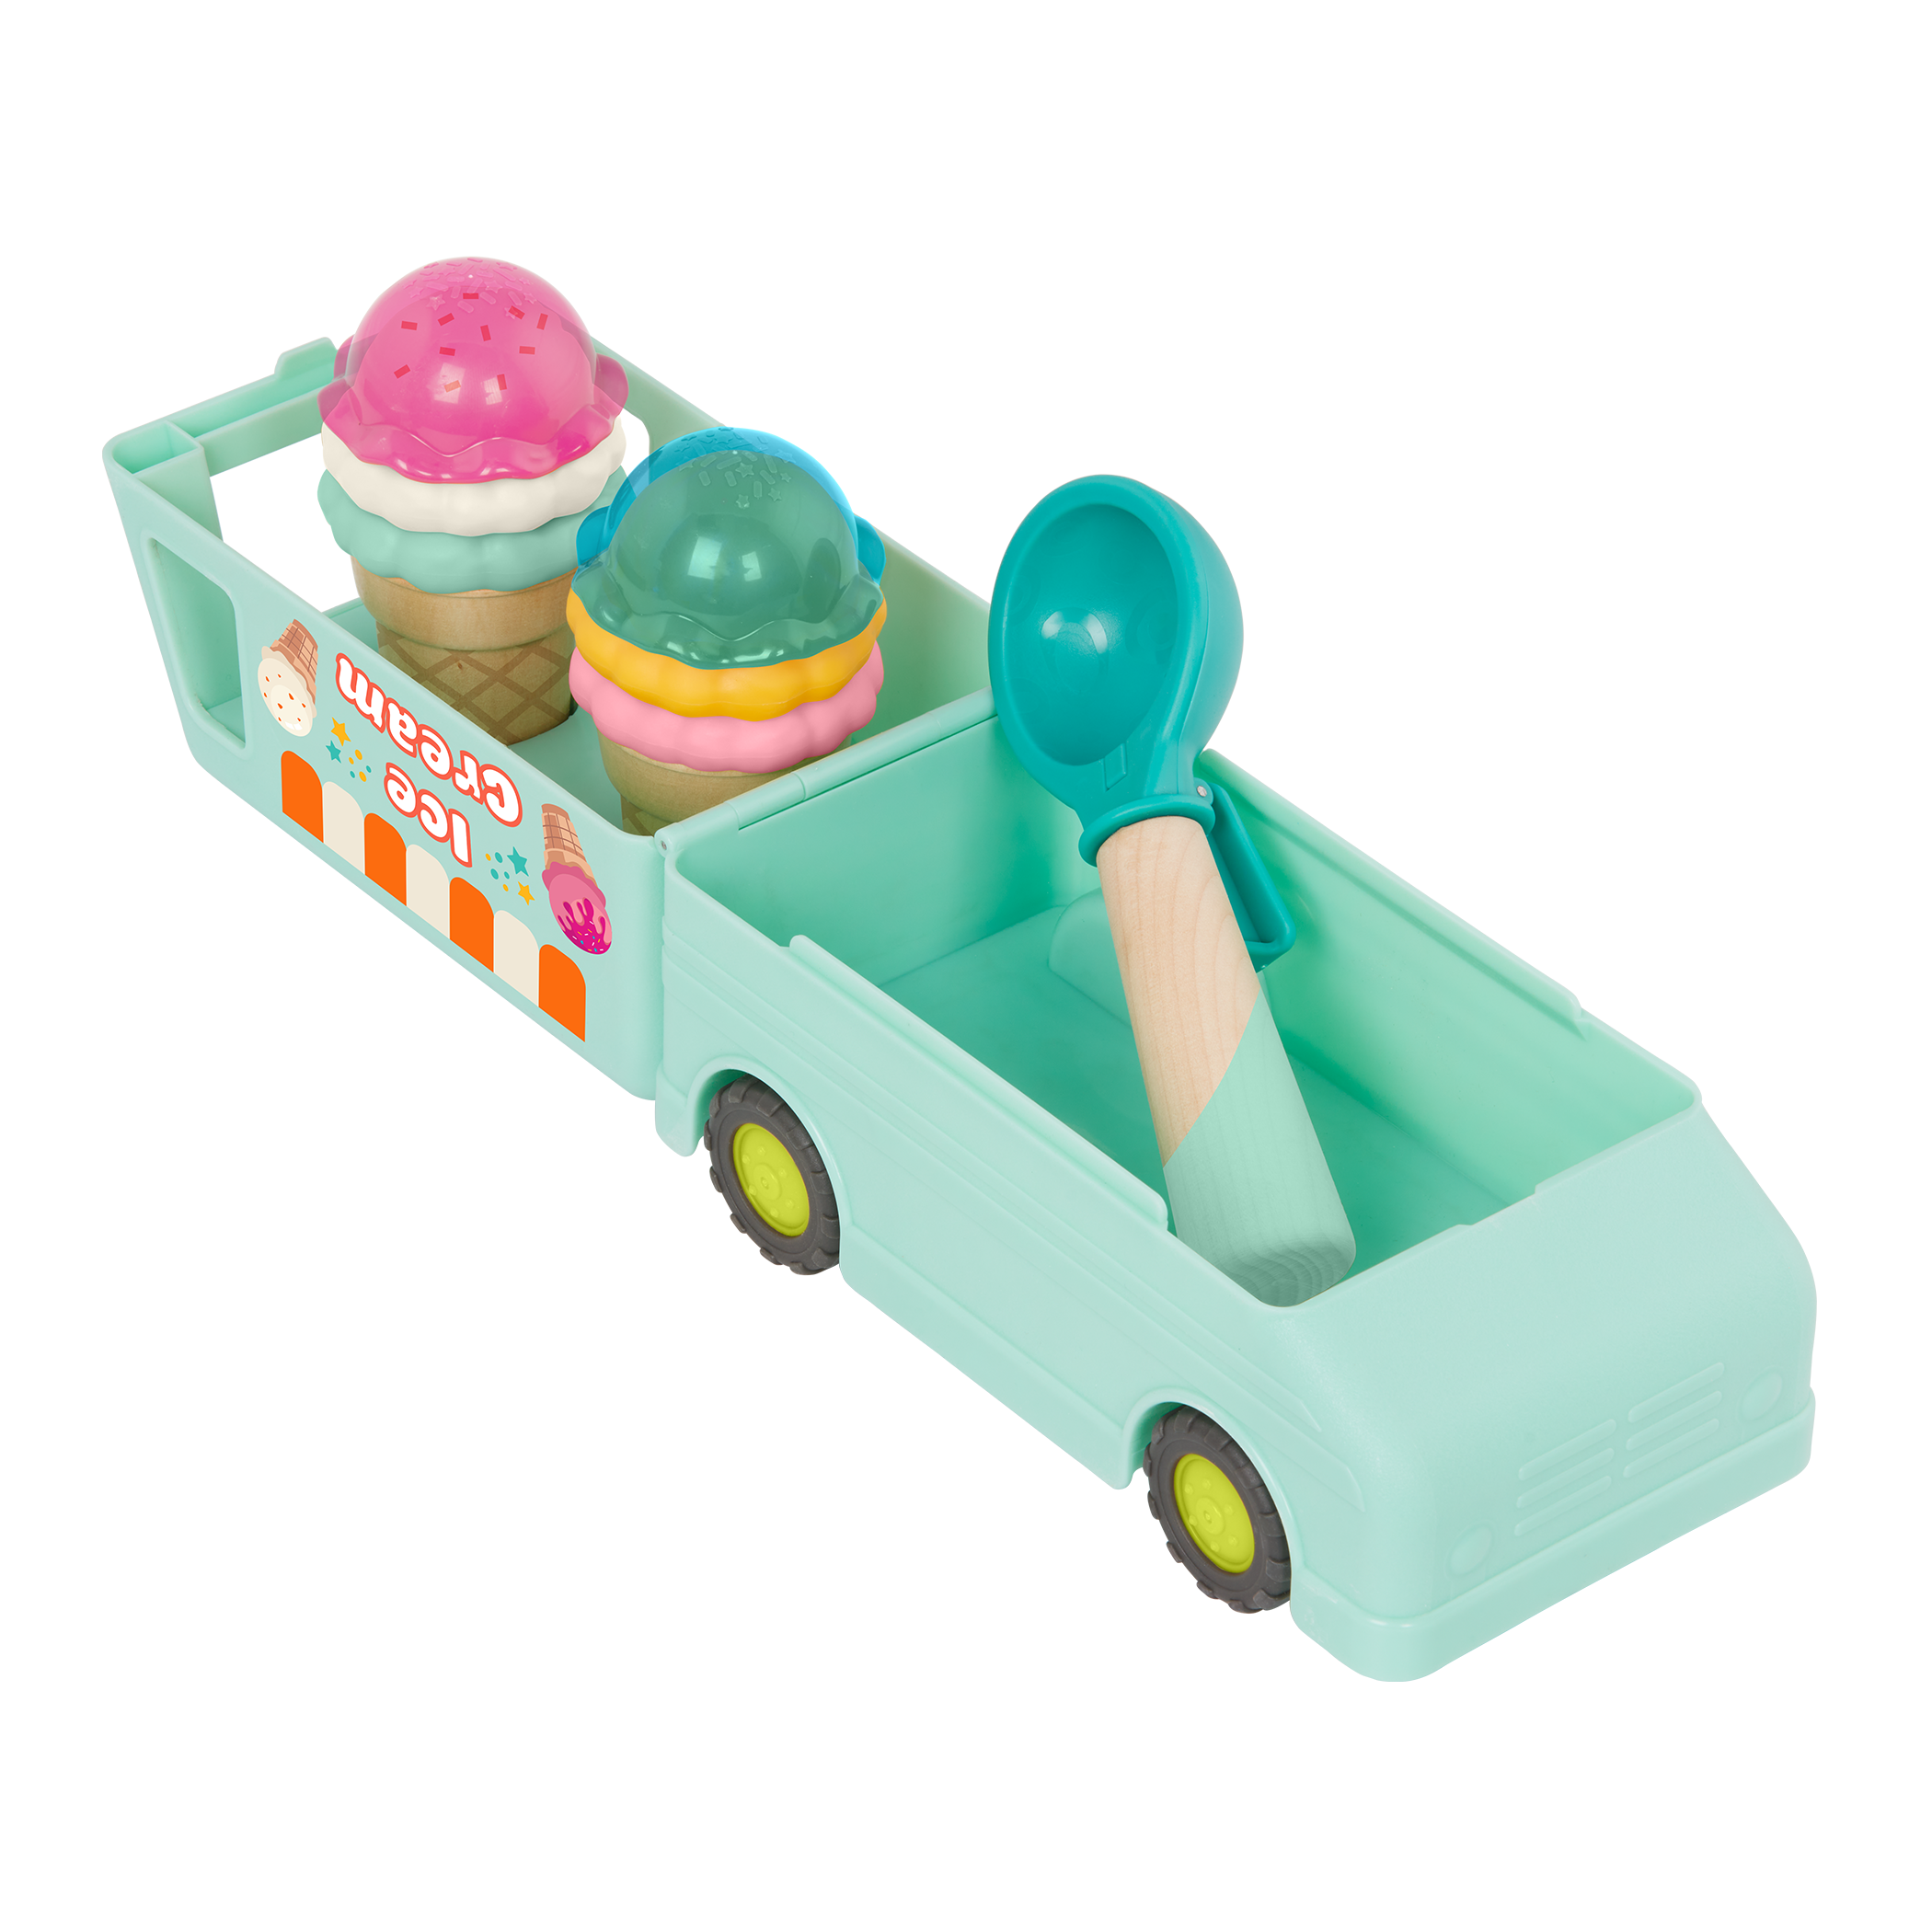 Toy ice cream truck with scoops.